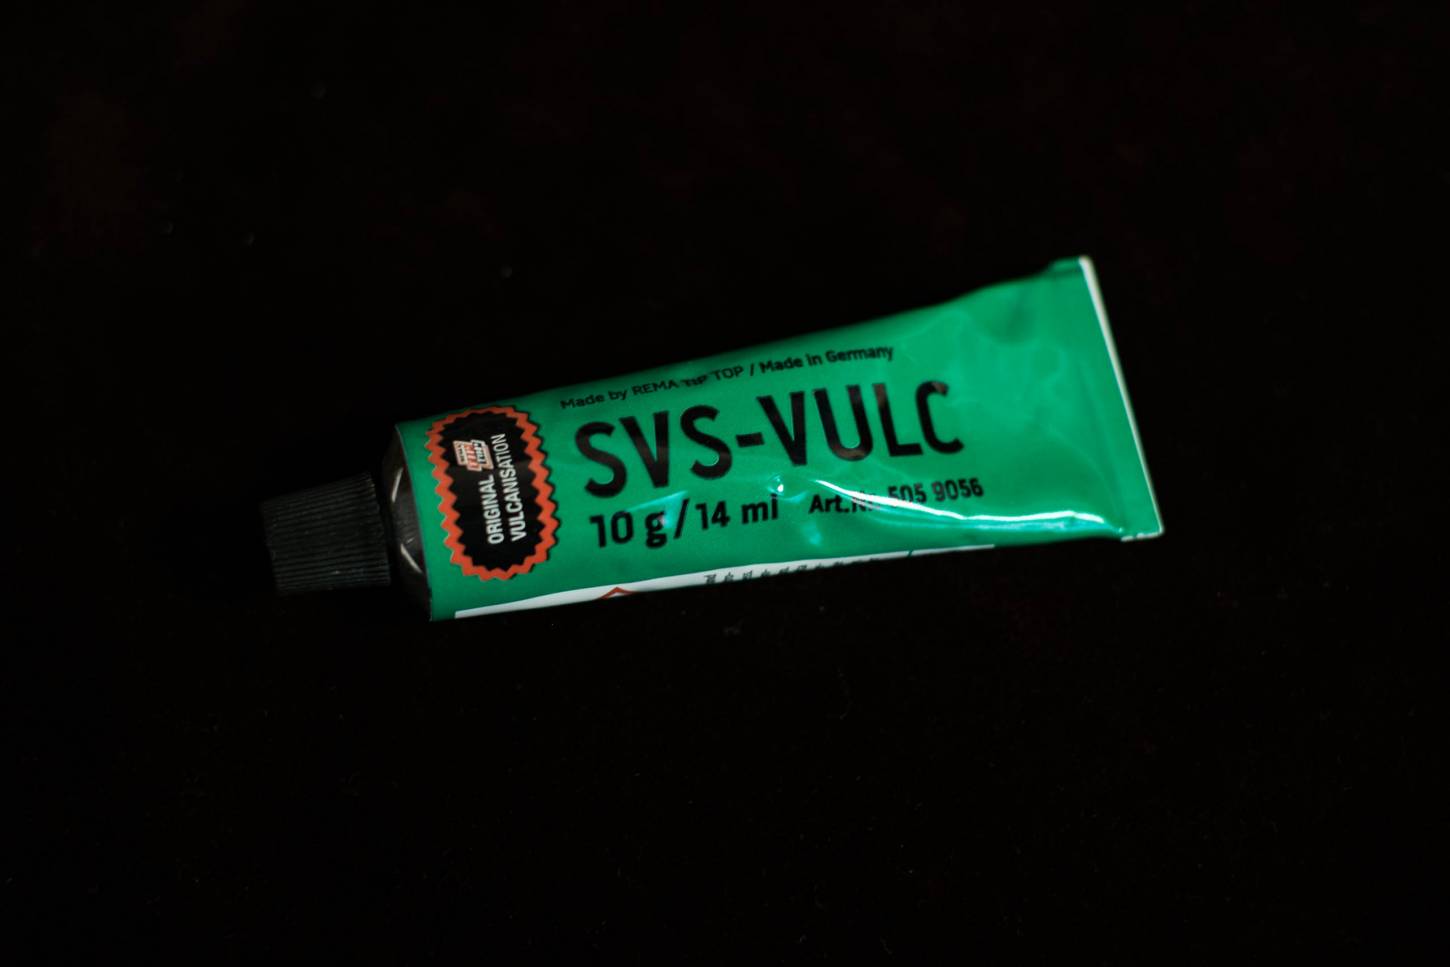 Rubber solution Tip Top SVS-VULC Vulcanising solution 10 g/14 ml bicycle patch adhesive